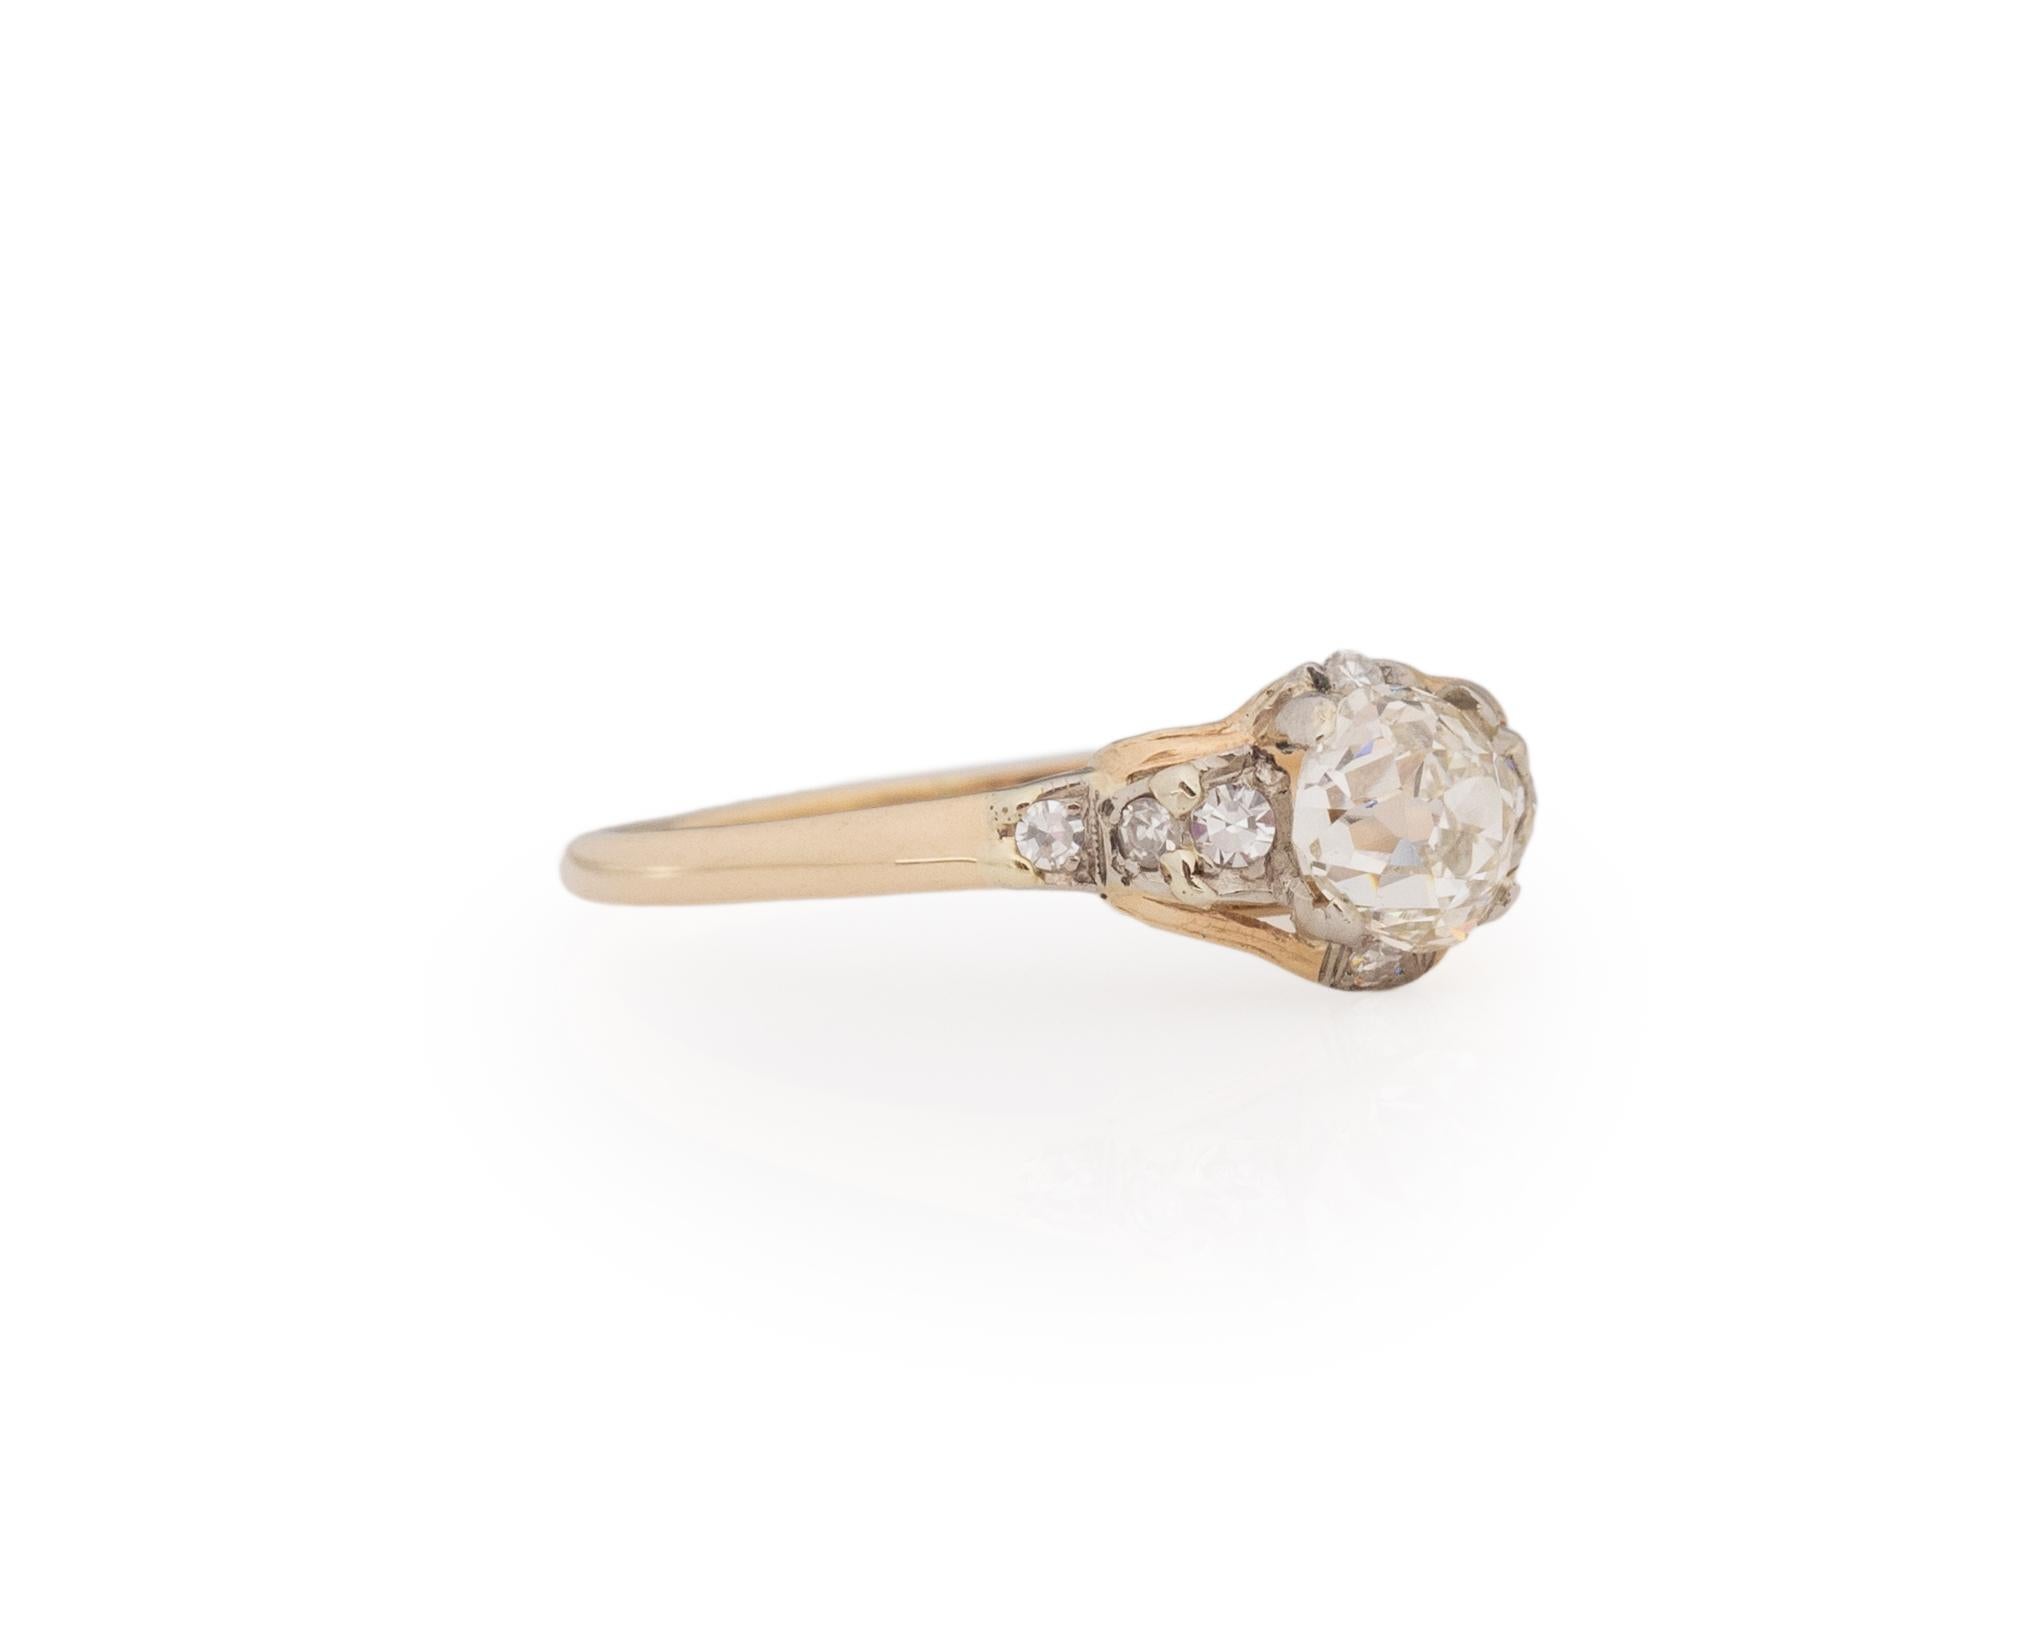 Ring Size: 7.75
Metal Type: 14K Yellow Gold [Hallmarked, and Tested]
Weight: 1.57 grams

Center Diamond Details:
GIA REPORT #:2225646966
Weight: .82ct
Cut: Old Mine Brilliant
Color: M
Clarity: VS2
Measurements: 5.79mm x 5.18mm x 3.71mm

Finger to